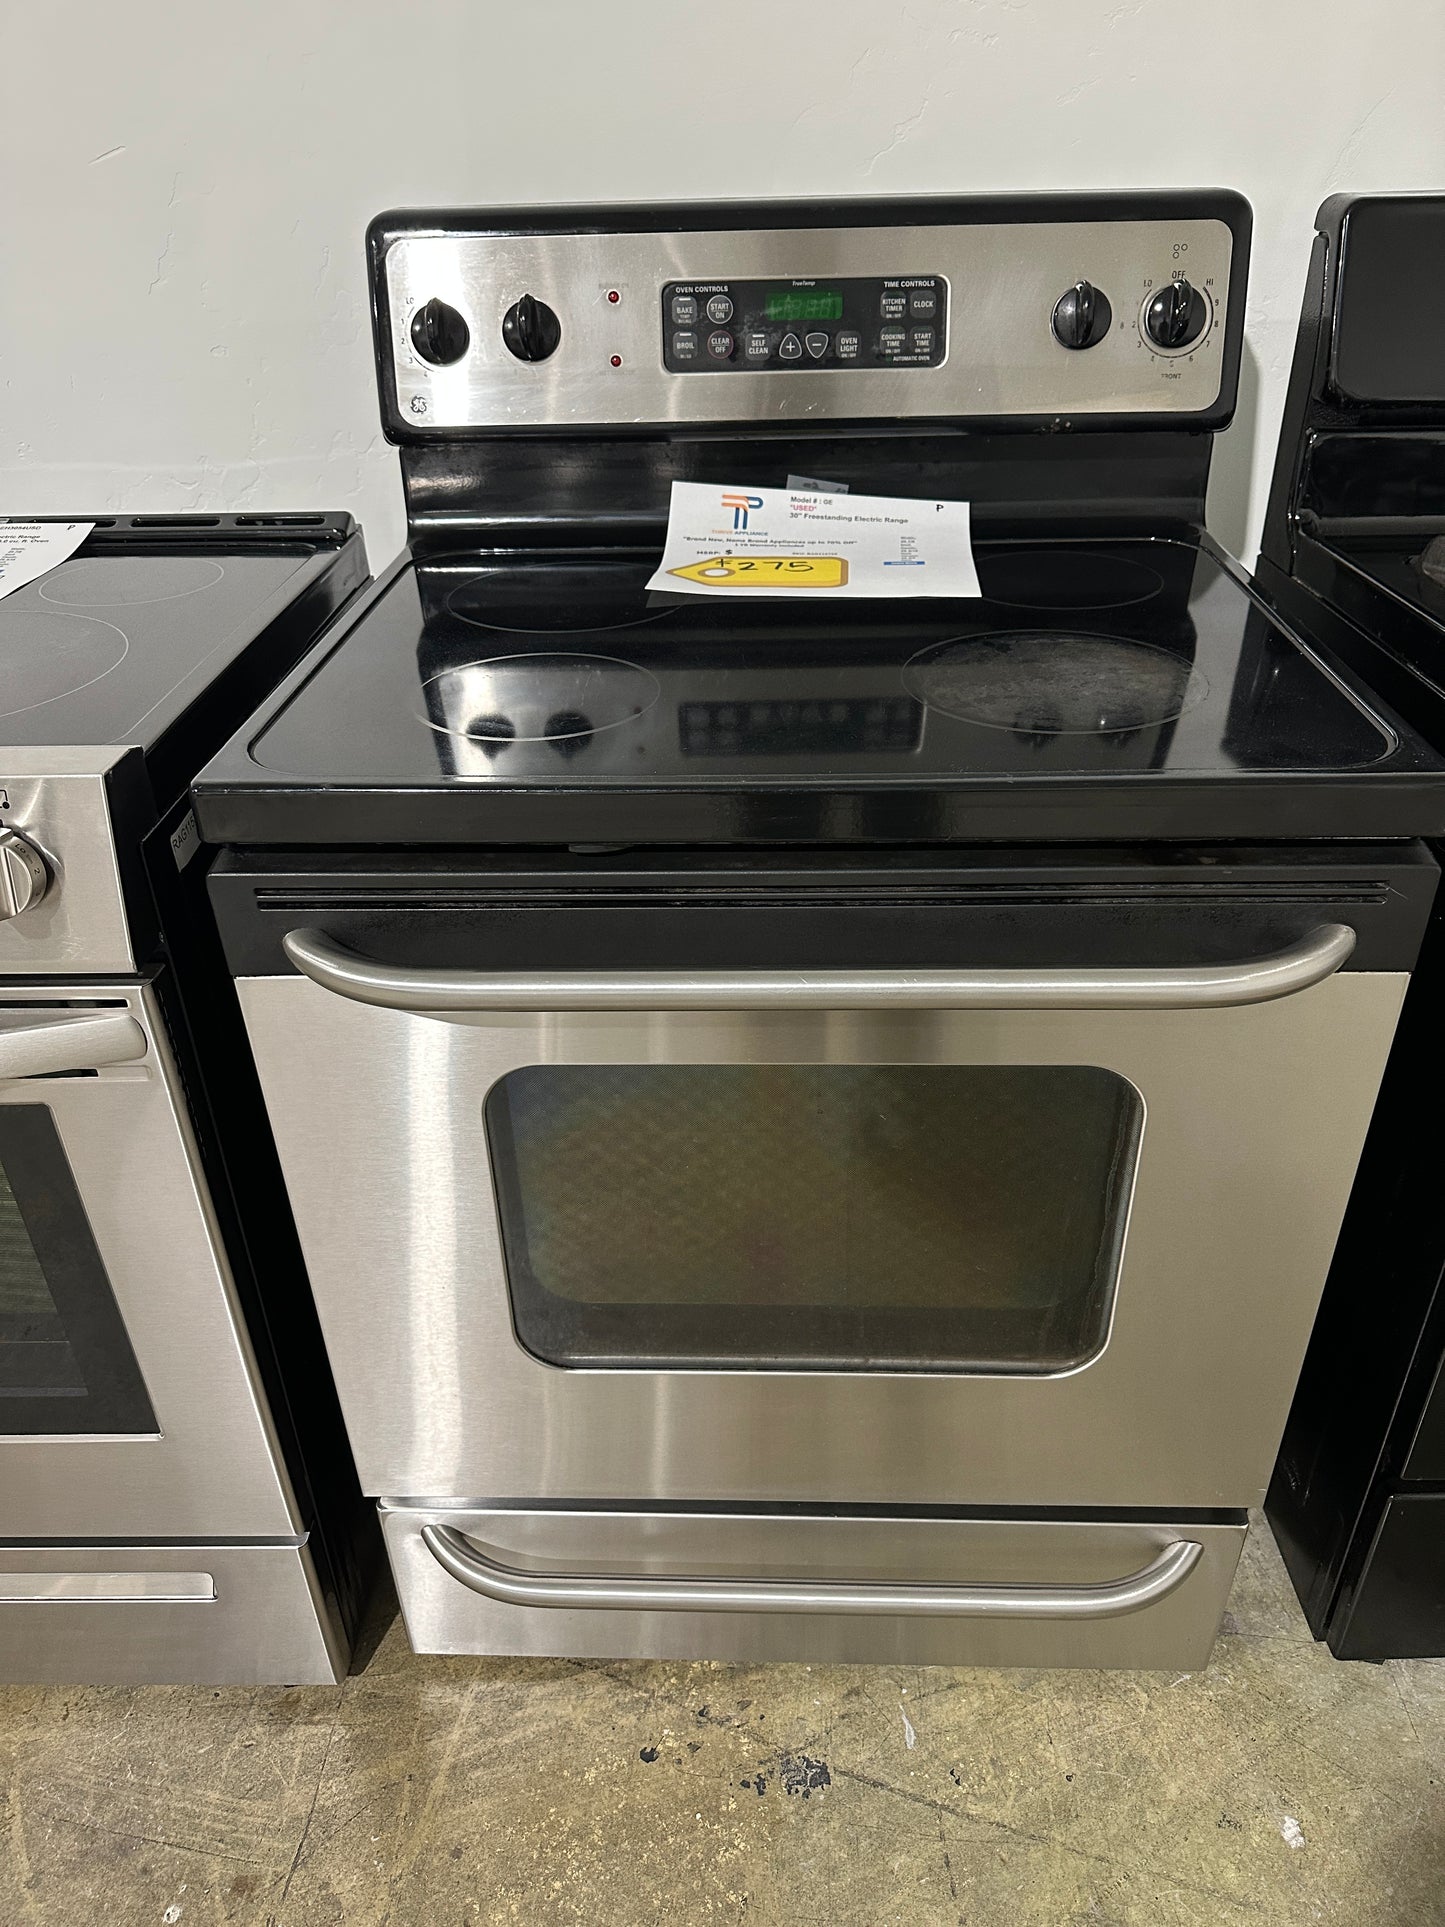 USED GE ELECTRIC RANGE - GREAT CONDITION - RAG11575S